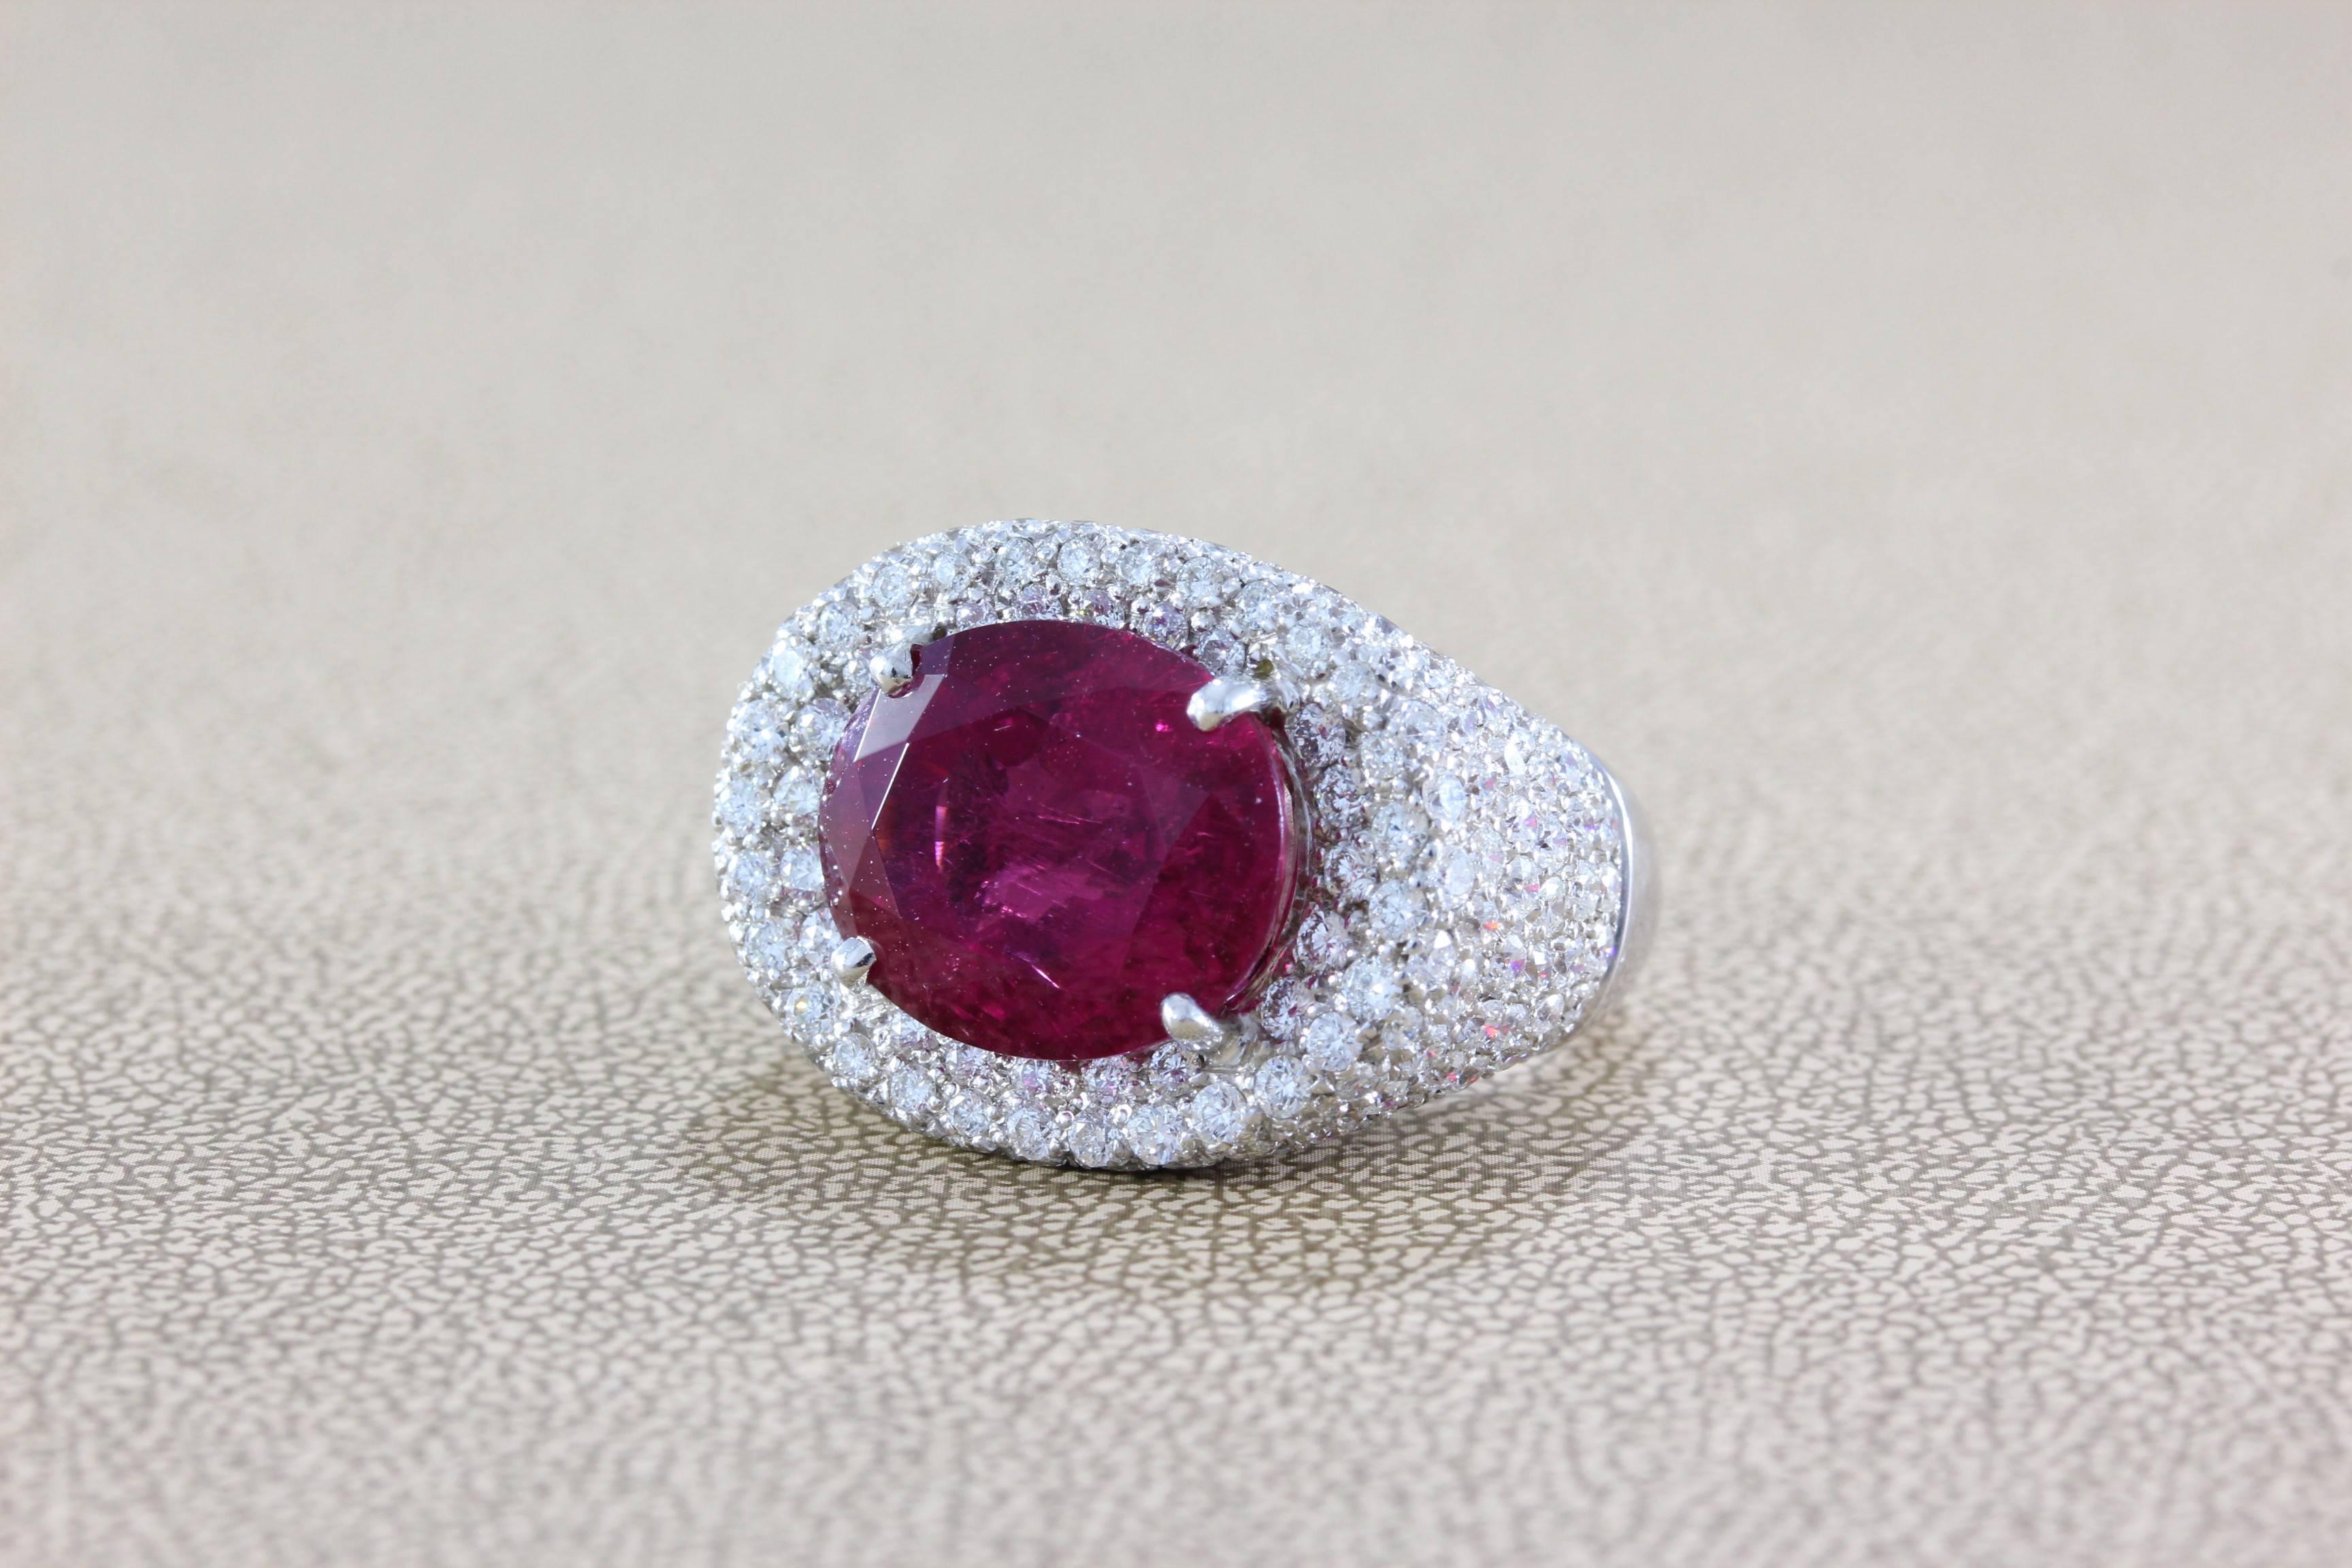 A ring featuring a superb gem rubellite tourmaline weighing in at 12.16 carats. This gem displays a magnificent vivid raspberry red color that rivals the finest of rubies. Accenting the gemstone are over 4 carats of full-cut diamonds, all set in 18K